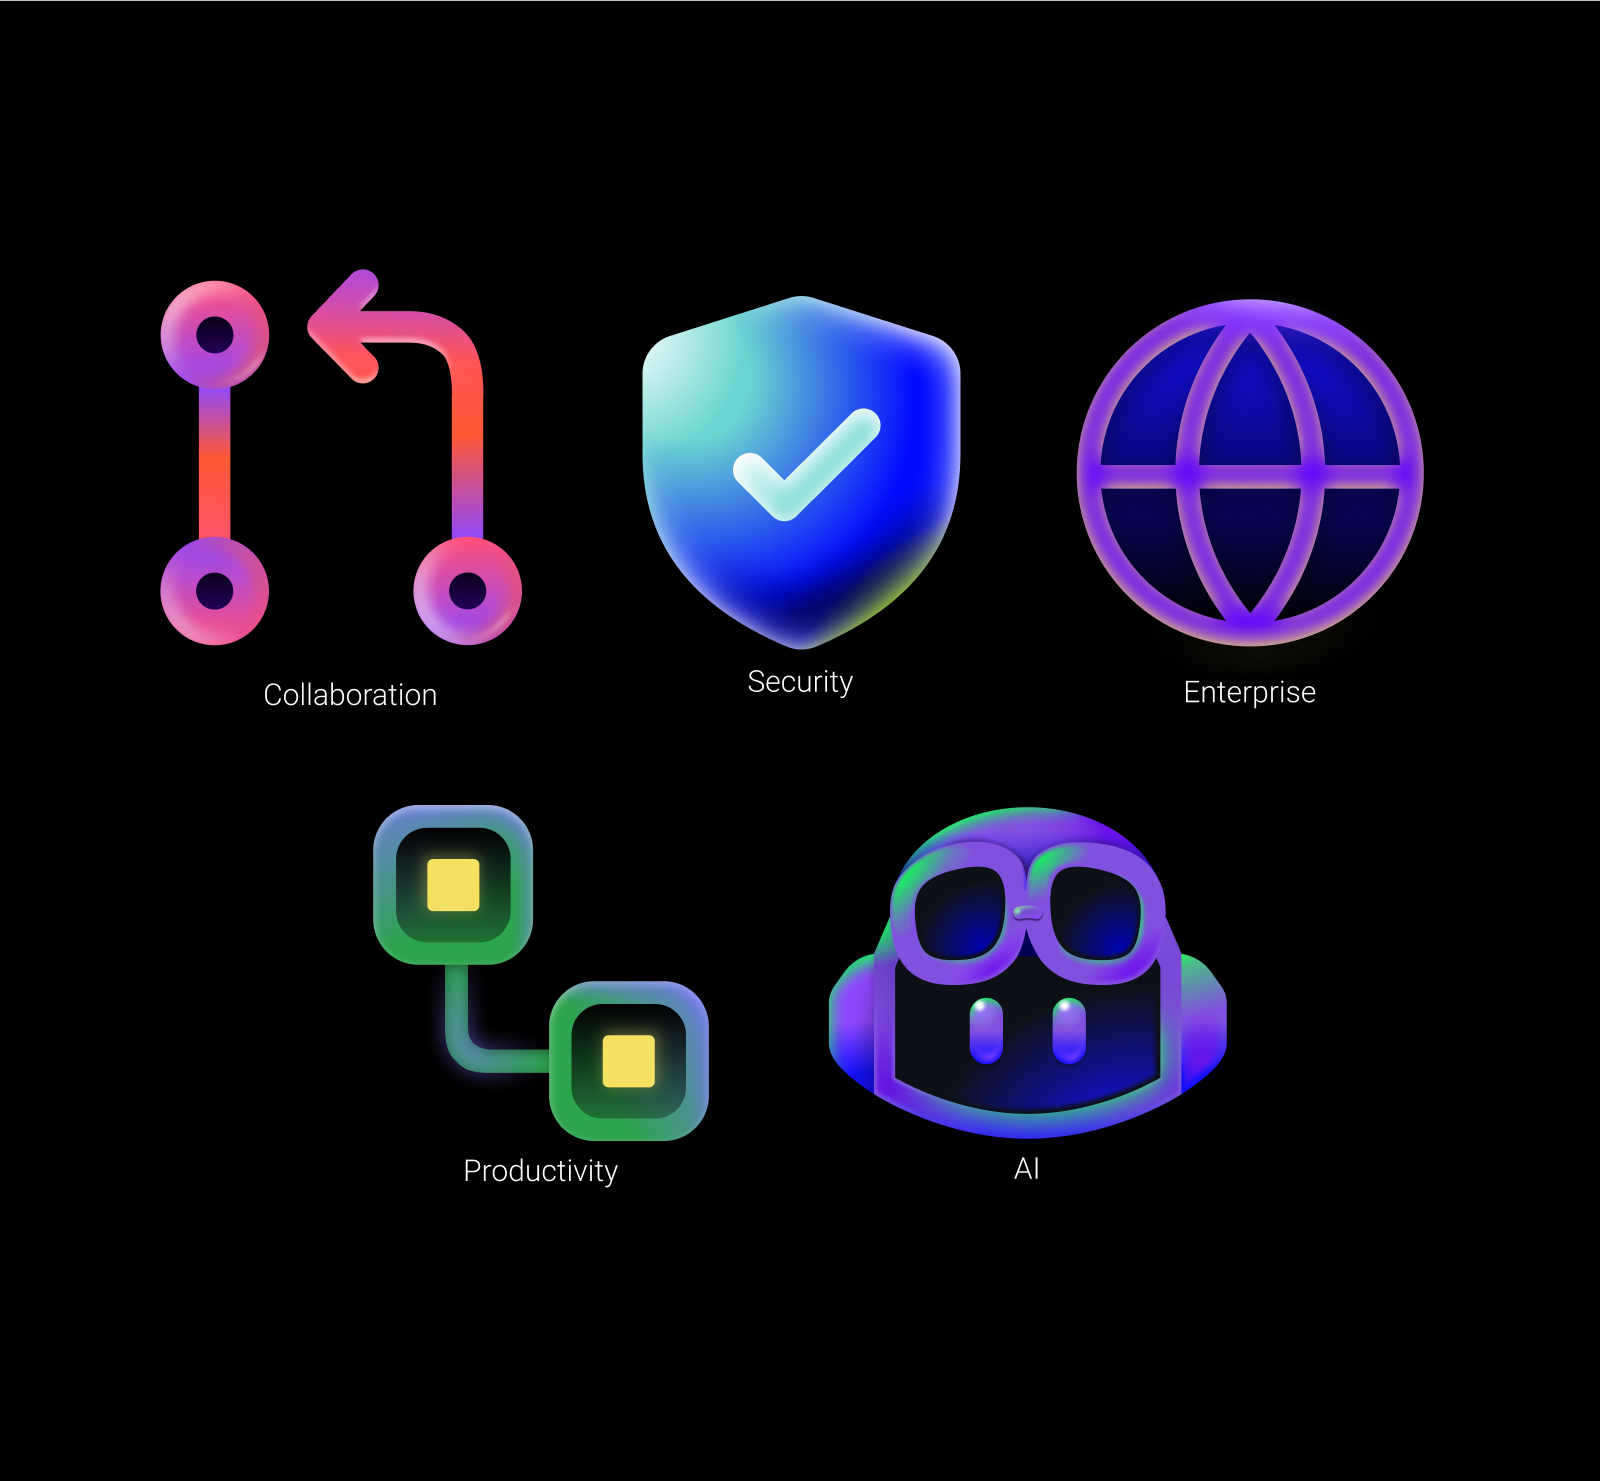 Five spot illustrations – one for each of our product pillars which are labeled AI, collaboration, productivity, enterprise, and security